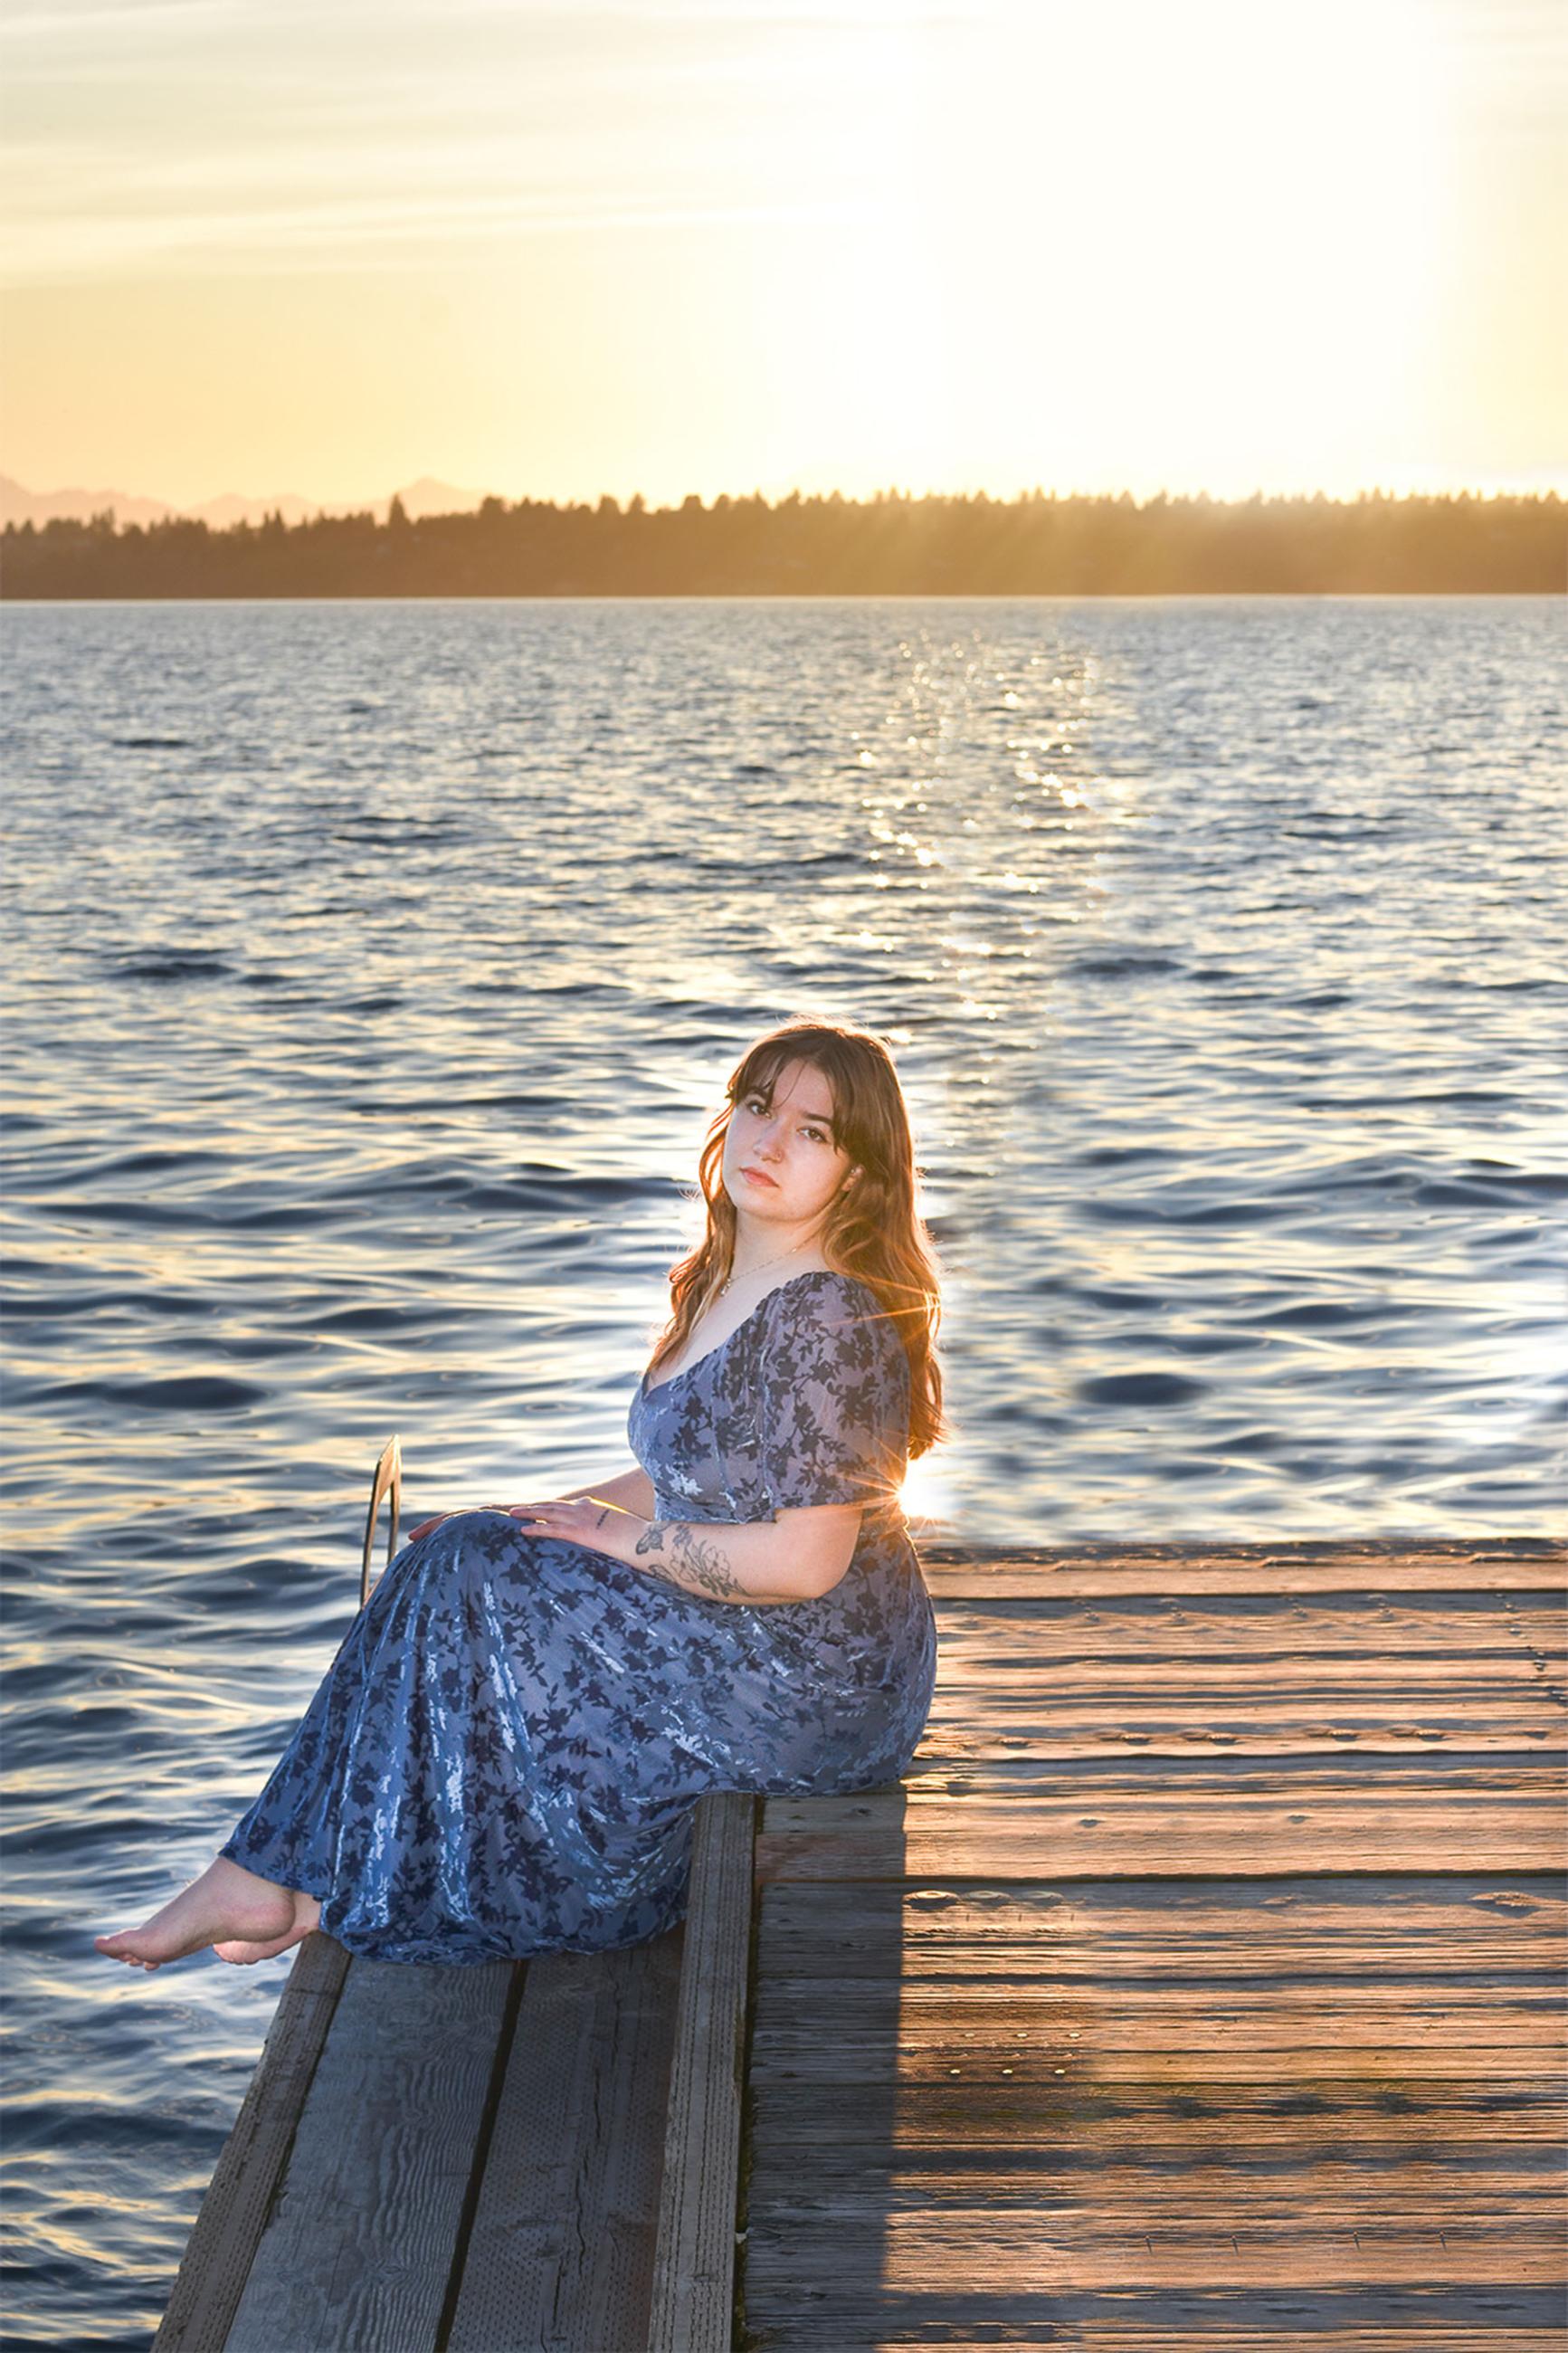 a person in a dress sits on a dock extending into the water with the sun setting in the background